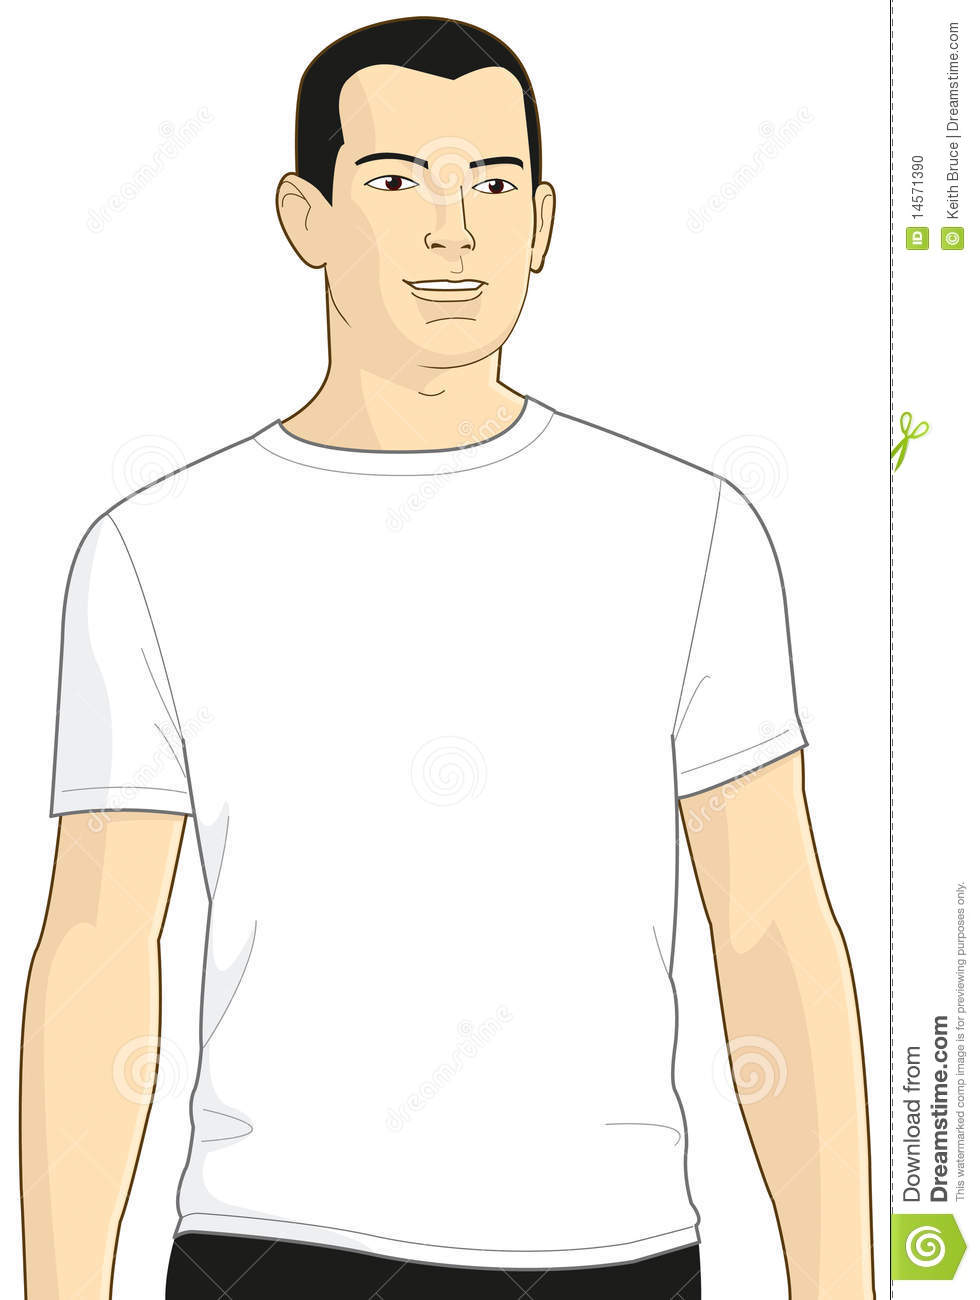 In Open White Space Clipping Path Included Asian Male Model Version